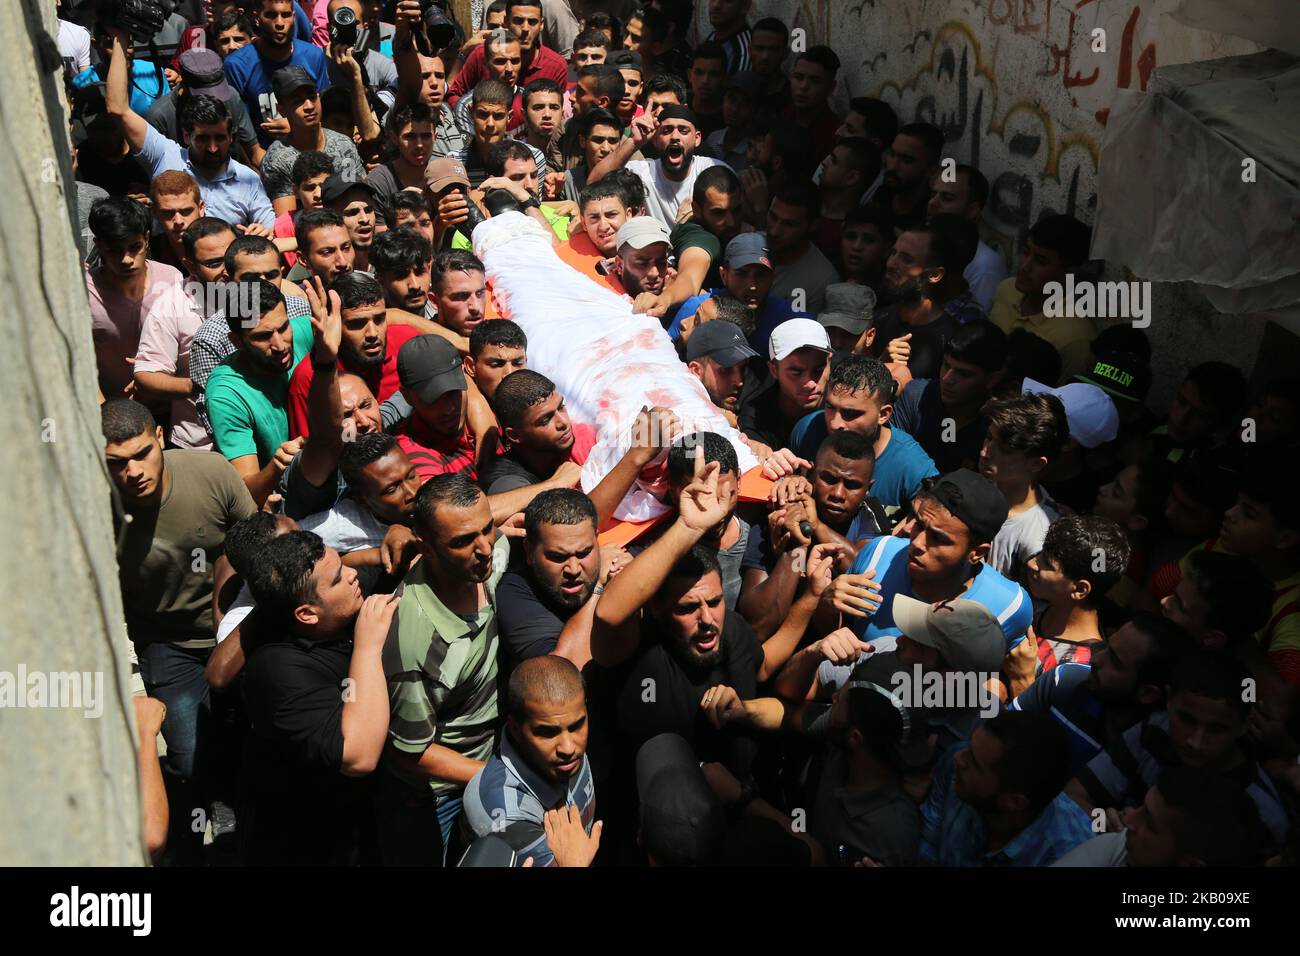 Palestinian mourners carry the body of 23 year-old Hamas fighter, Ahmad Morjan, during his funeral, in the Jabaliya refugee camp, Northern Gaza Strip, Tuesday, Aug. 7, 2018. The Israeli military said it targeted a Hamas military post in northern Gaza after militants opened fire, and Hamas said two of its fighters were killed. (Photo by Majdi Fathi/NurPhoto) Stock Photo